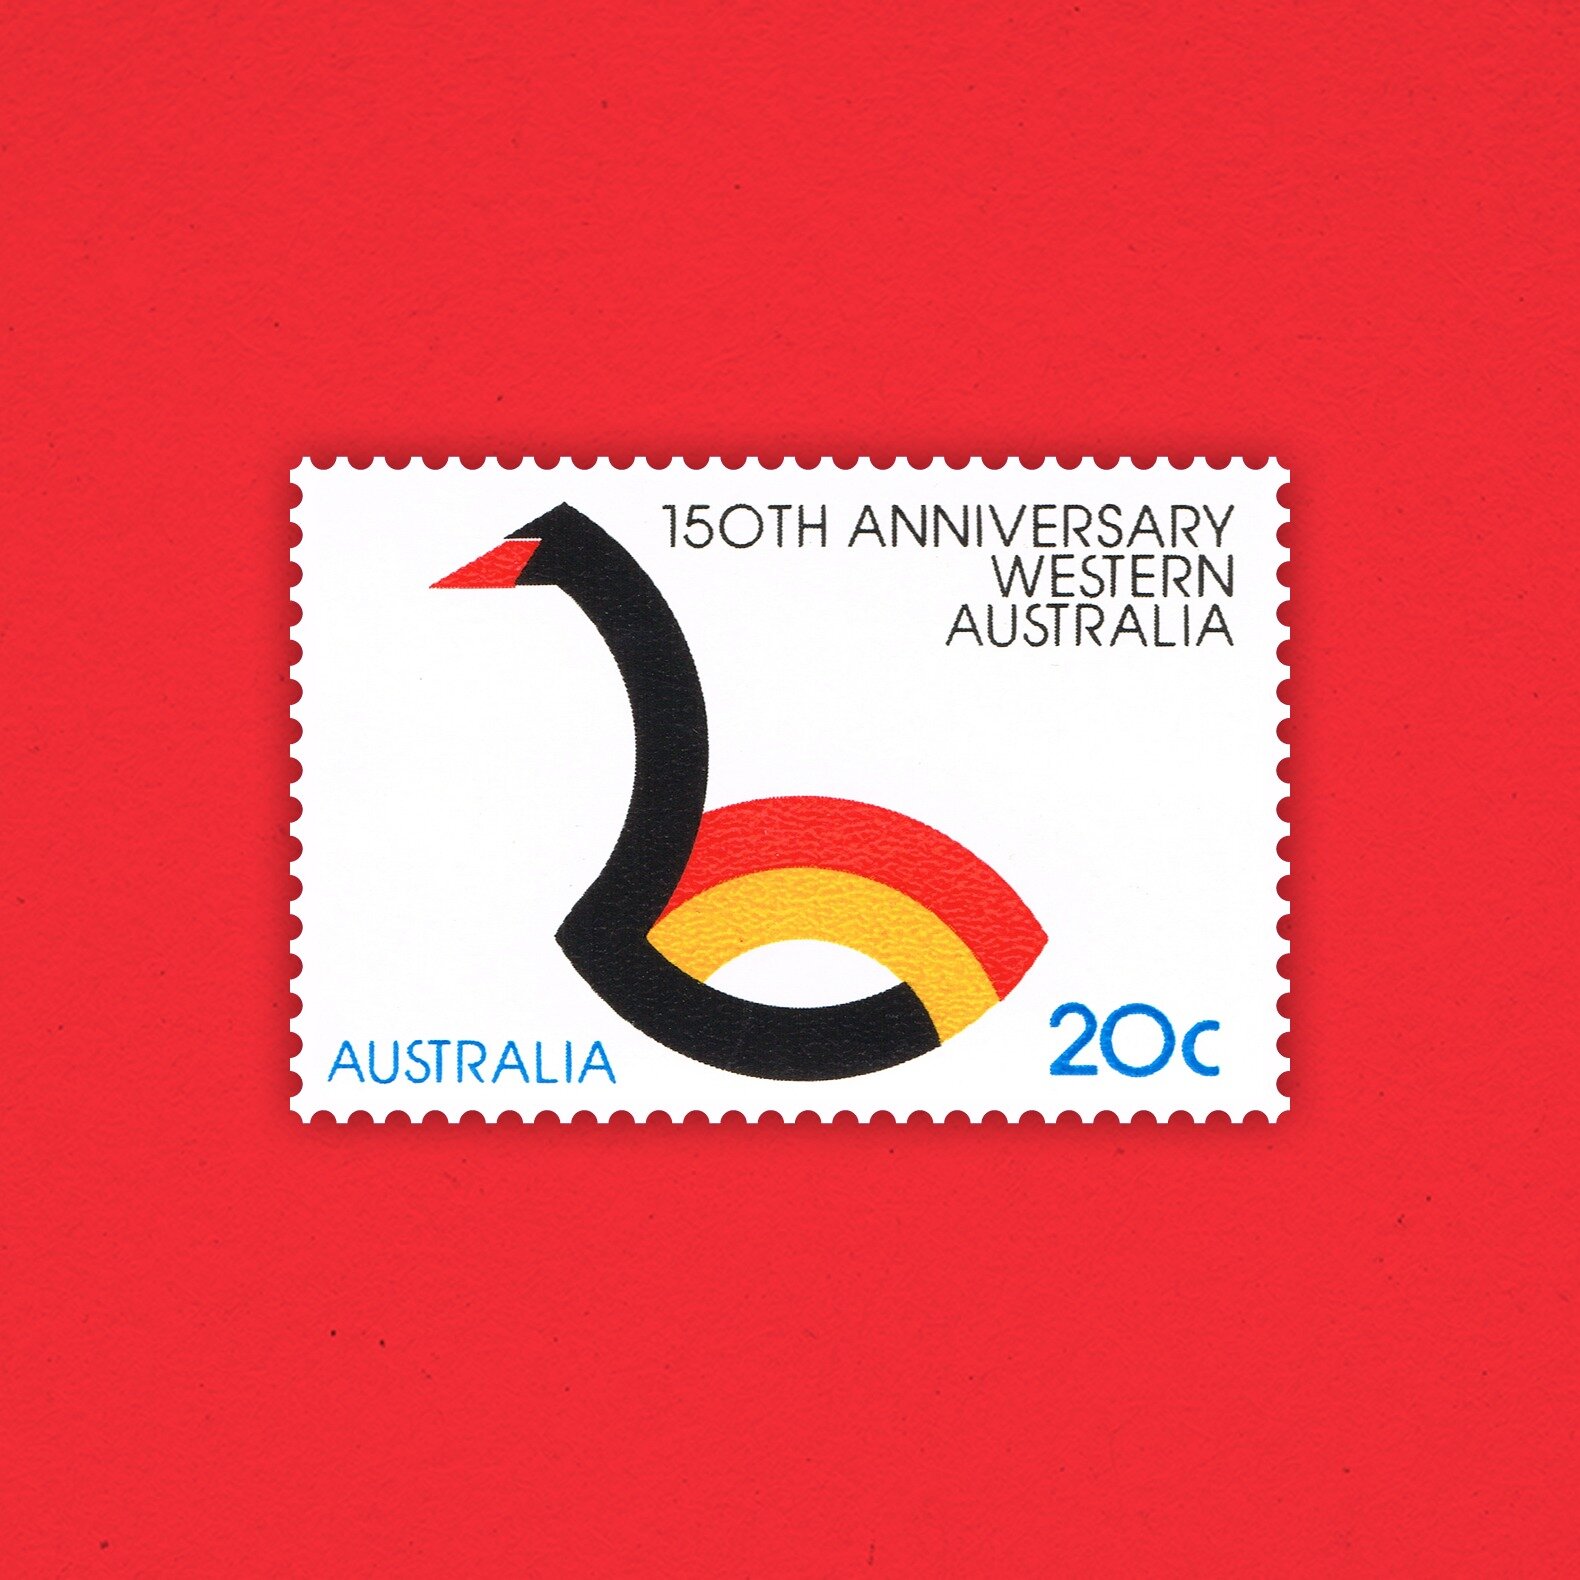 1979 150th Anniversary of Western Australia

The state of Western Australia was founded in 1829 by Captain James Stirling. This stamp commemorating this event embodies the State&rsquo;s official anniversary symbol adapted from the state&rsquo;s natio